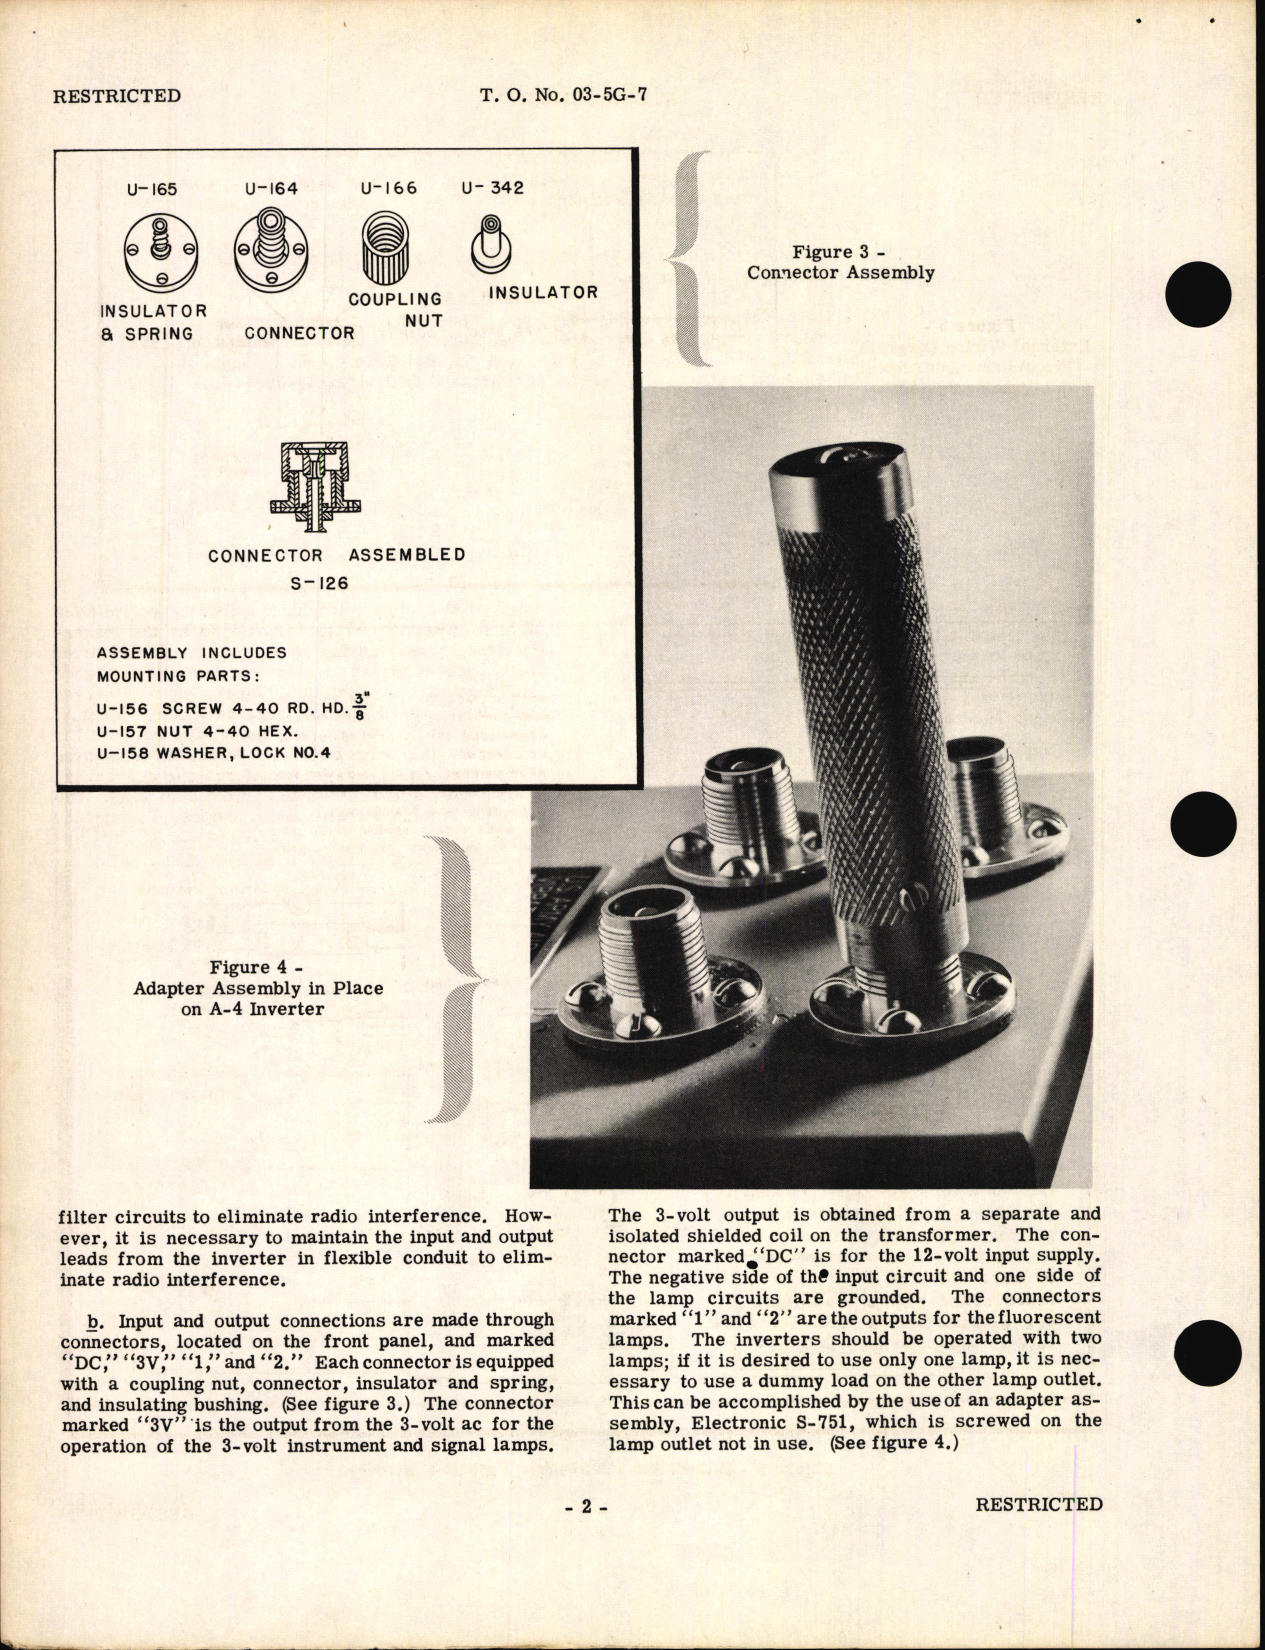 Sample page 6 from AirCorps Library document: Handbook of Instructions with Parts Catalog for Type A-4 Inverter